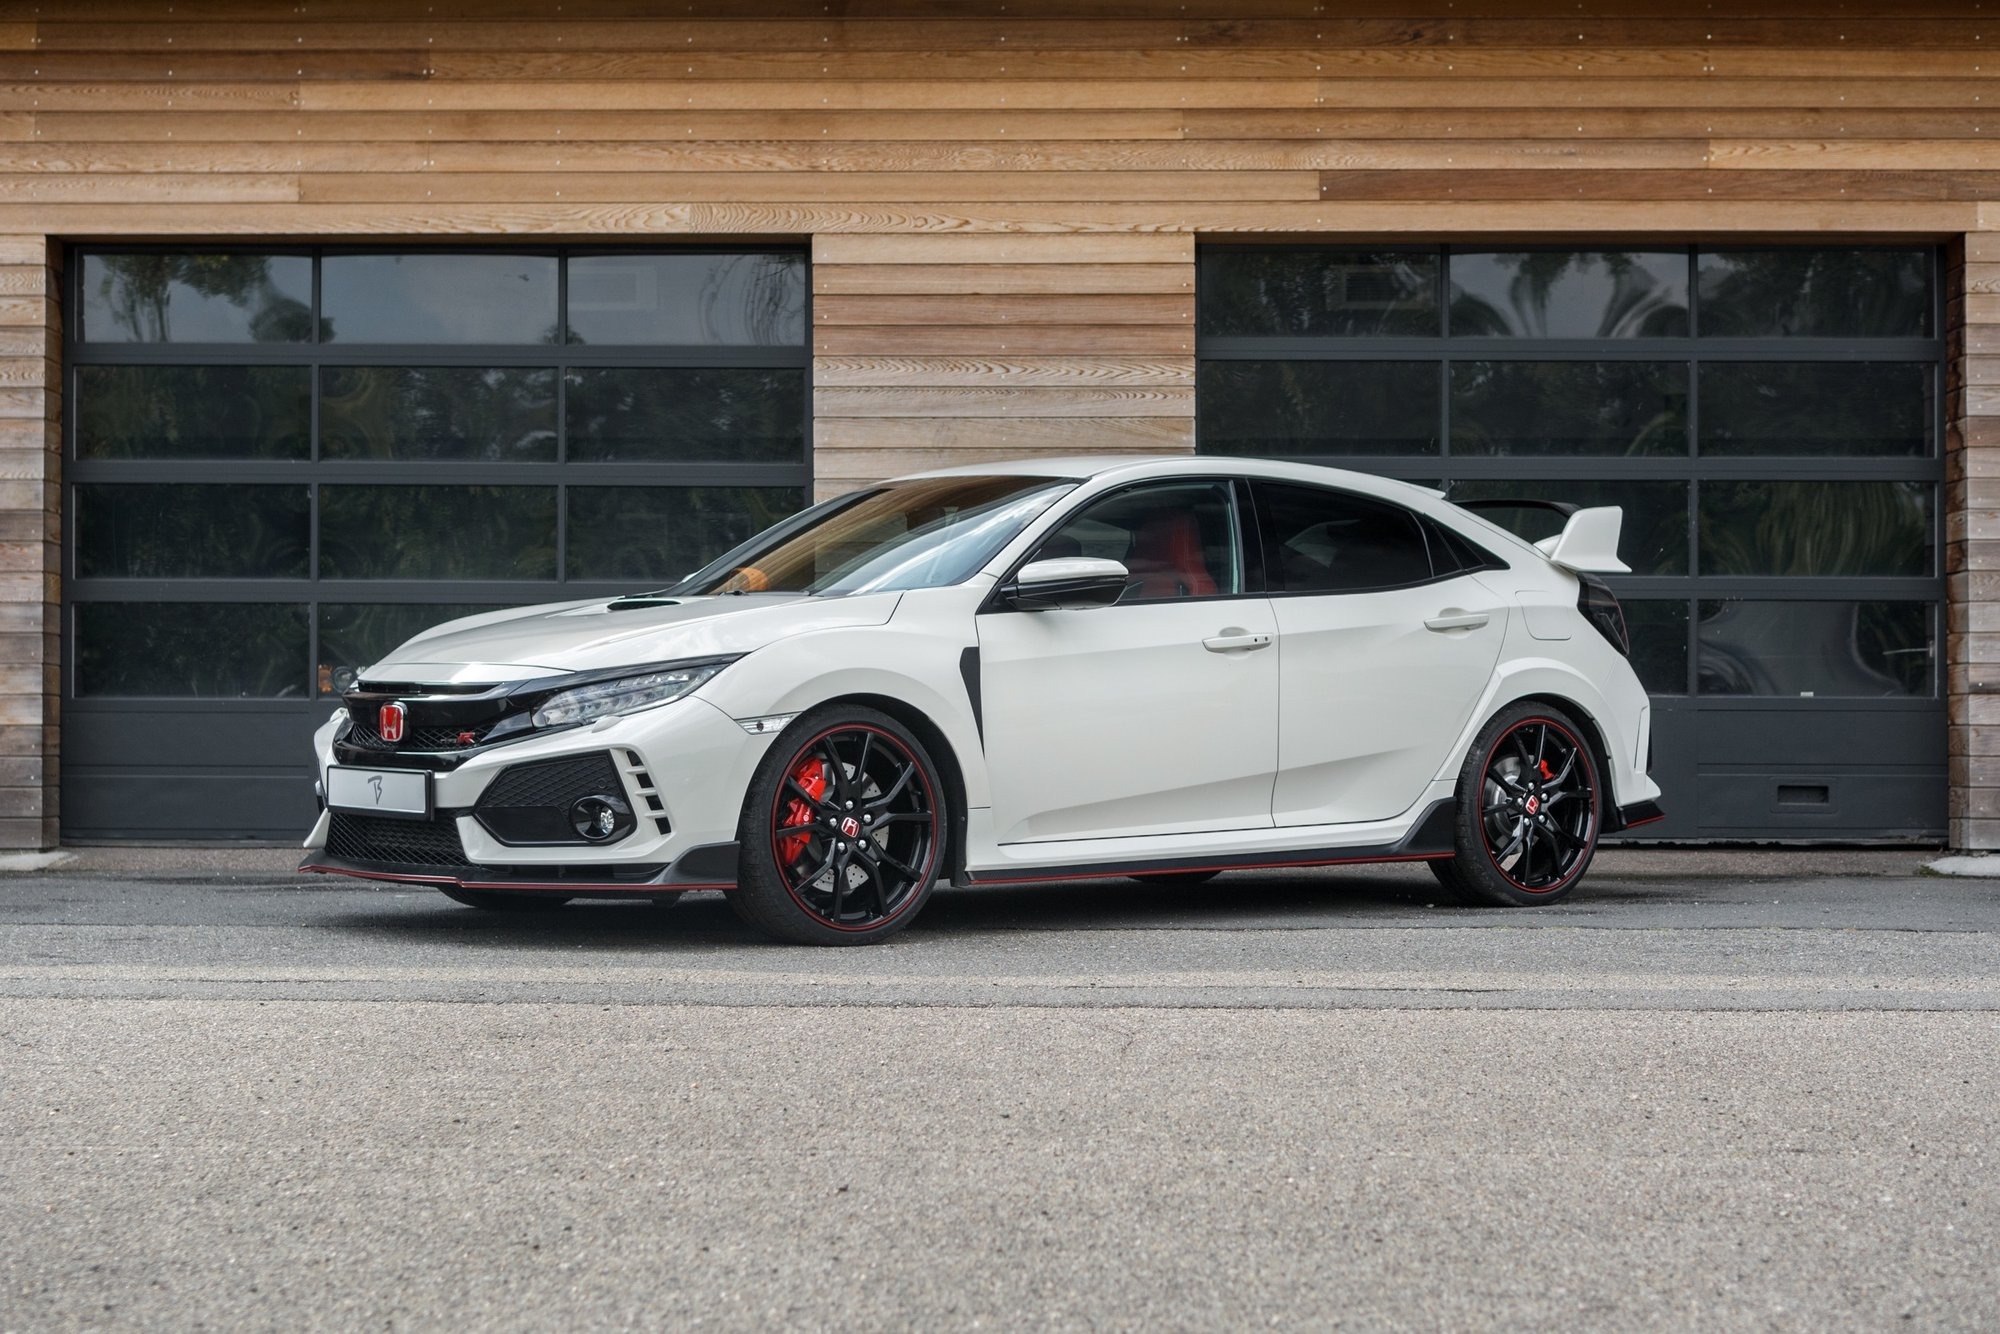 Max Verstappen's Former 2018 Honda Civic Type R Is Up for Sale (Again)